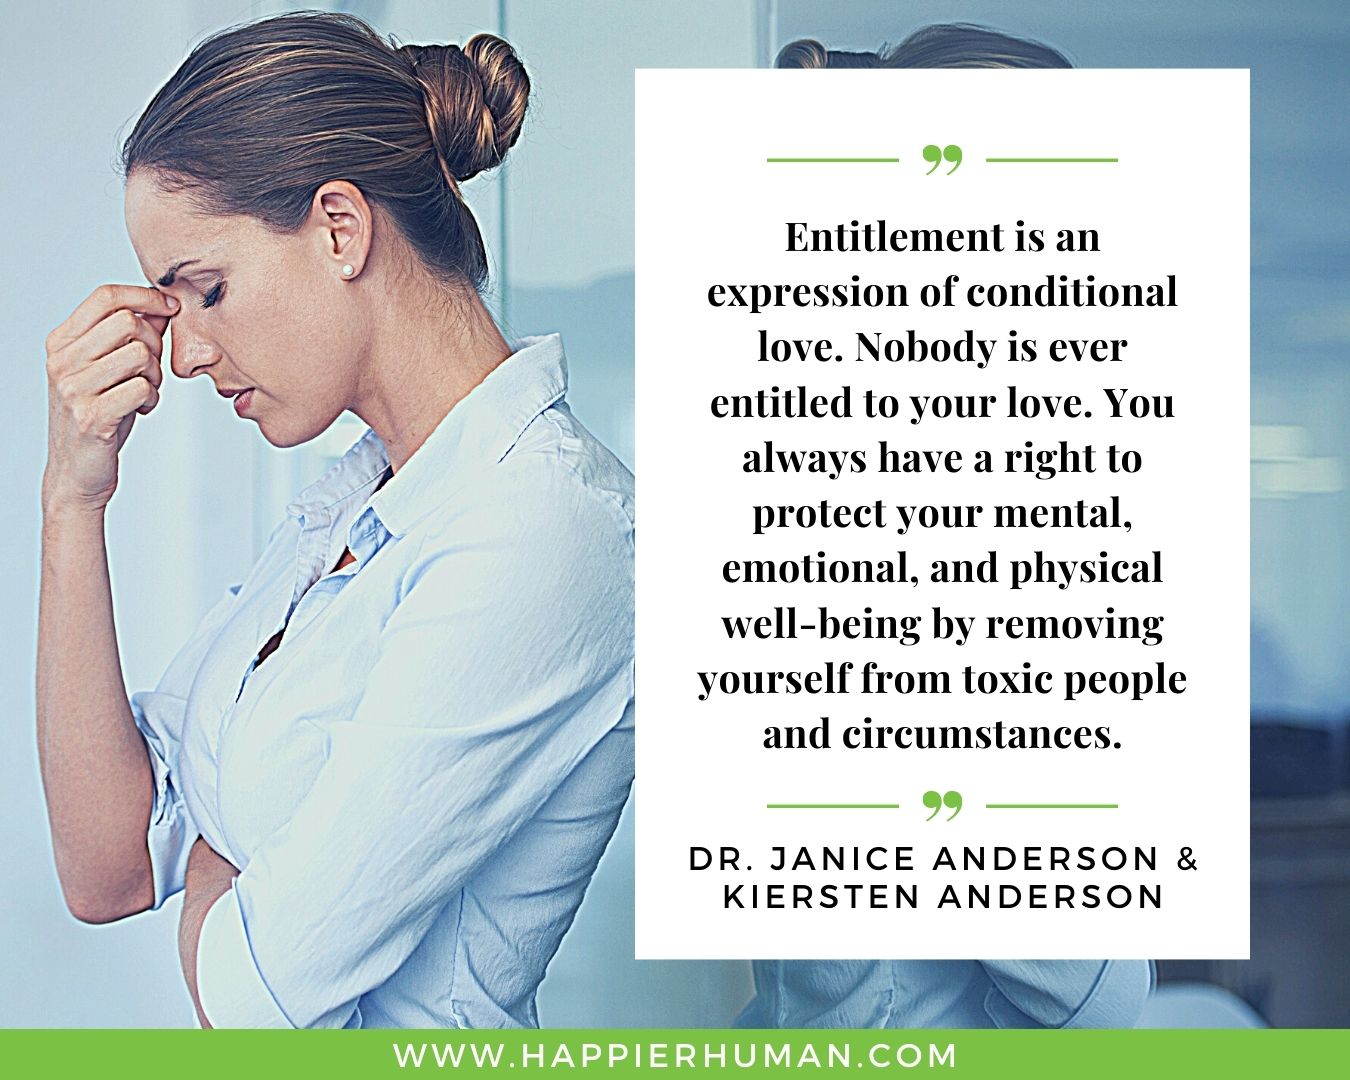 Toxic People Quotes - “Entitlement is an expression of conditional love. Nobody is ever entitled to your love. You always have a right to protect your mental, emotional, and physical well-being by removing yourself from toxic people and circumstances.” – Dr. Janice Anderson & Kiersten Anderson